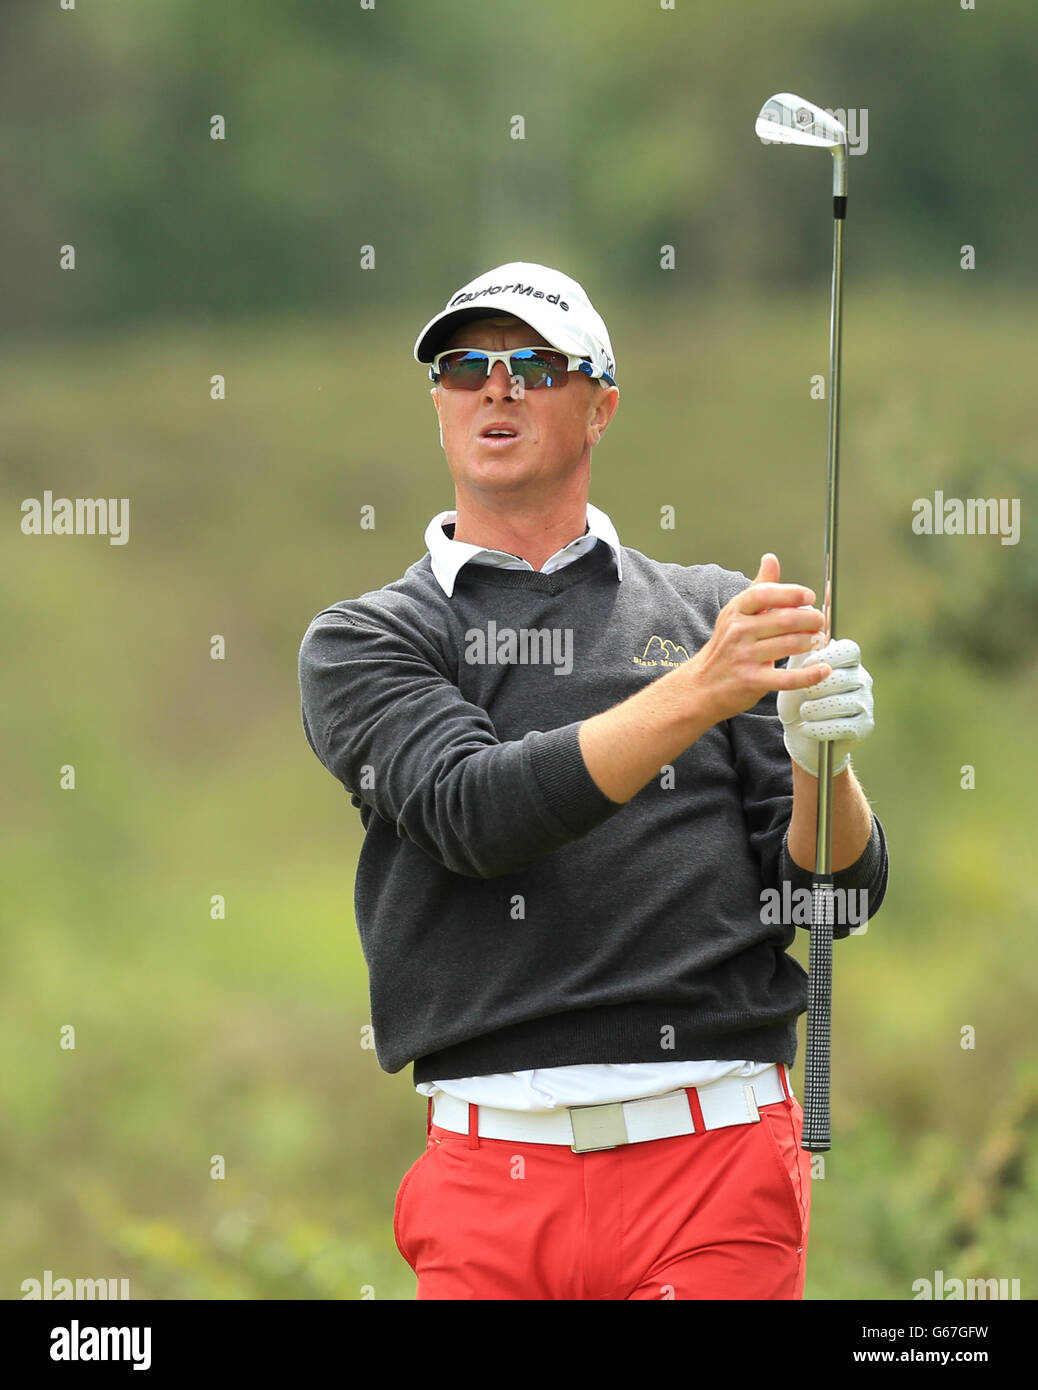 Golf - The Open Championship 2013 - Qualifying - Sunningdale Golf Club. Sweden's Fredrik Andersson Hed Stock Photo